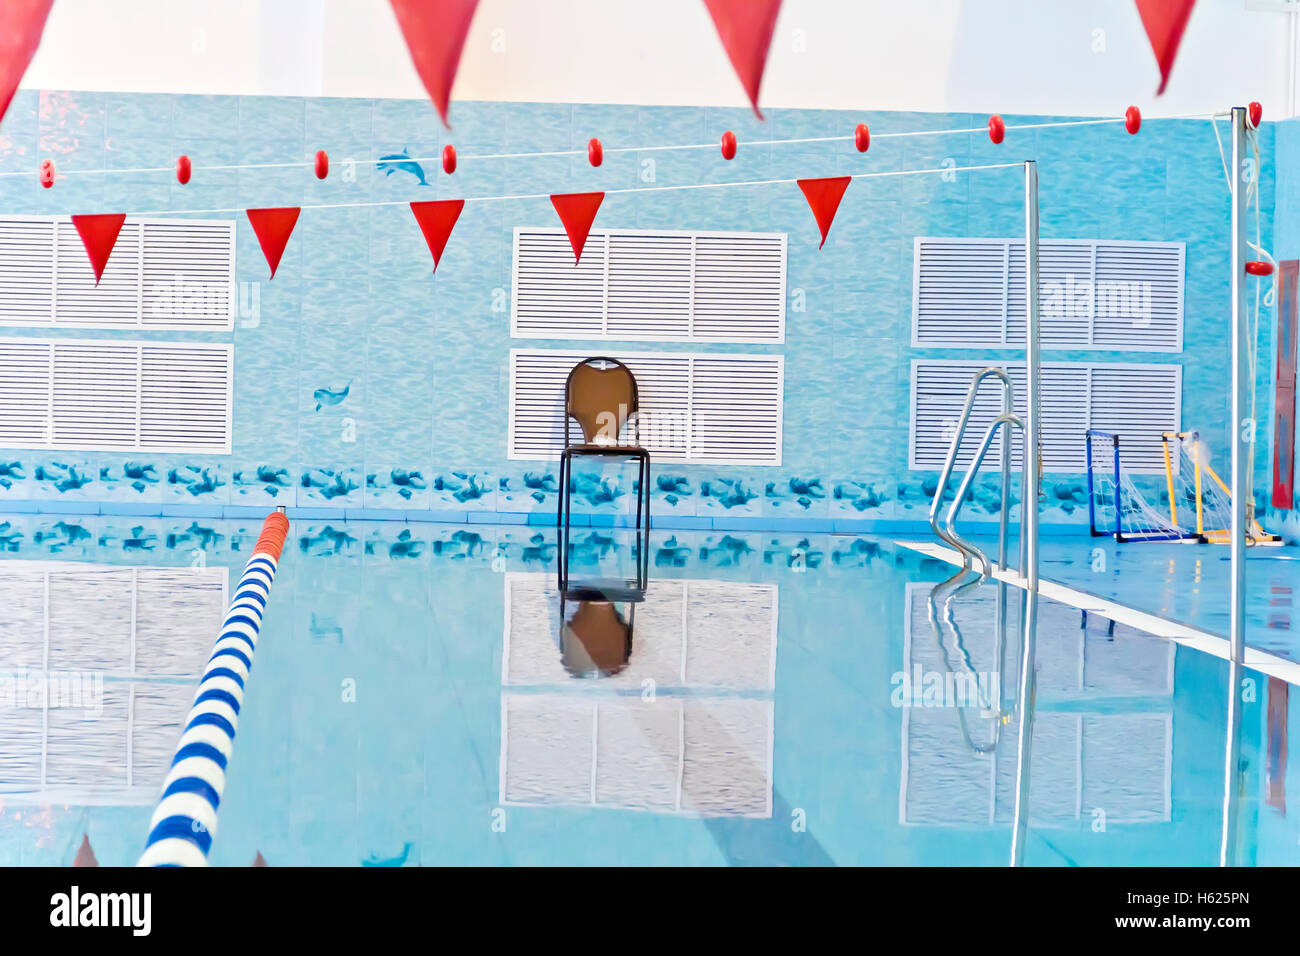 Photo of empty swimming pool with red flags Stock Photo